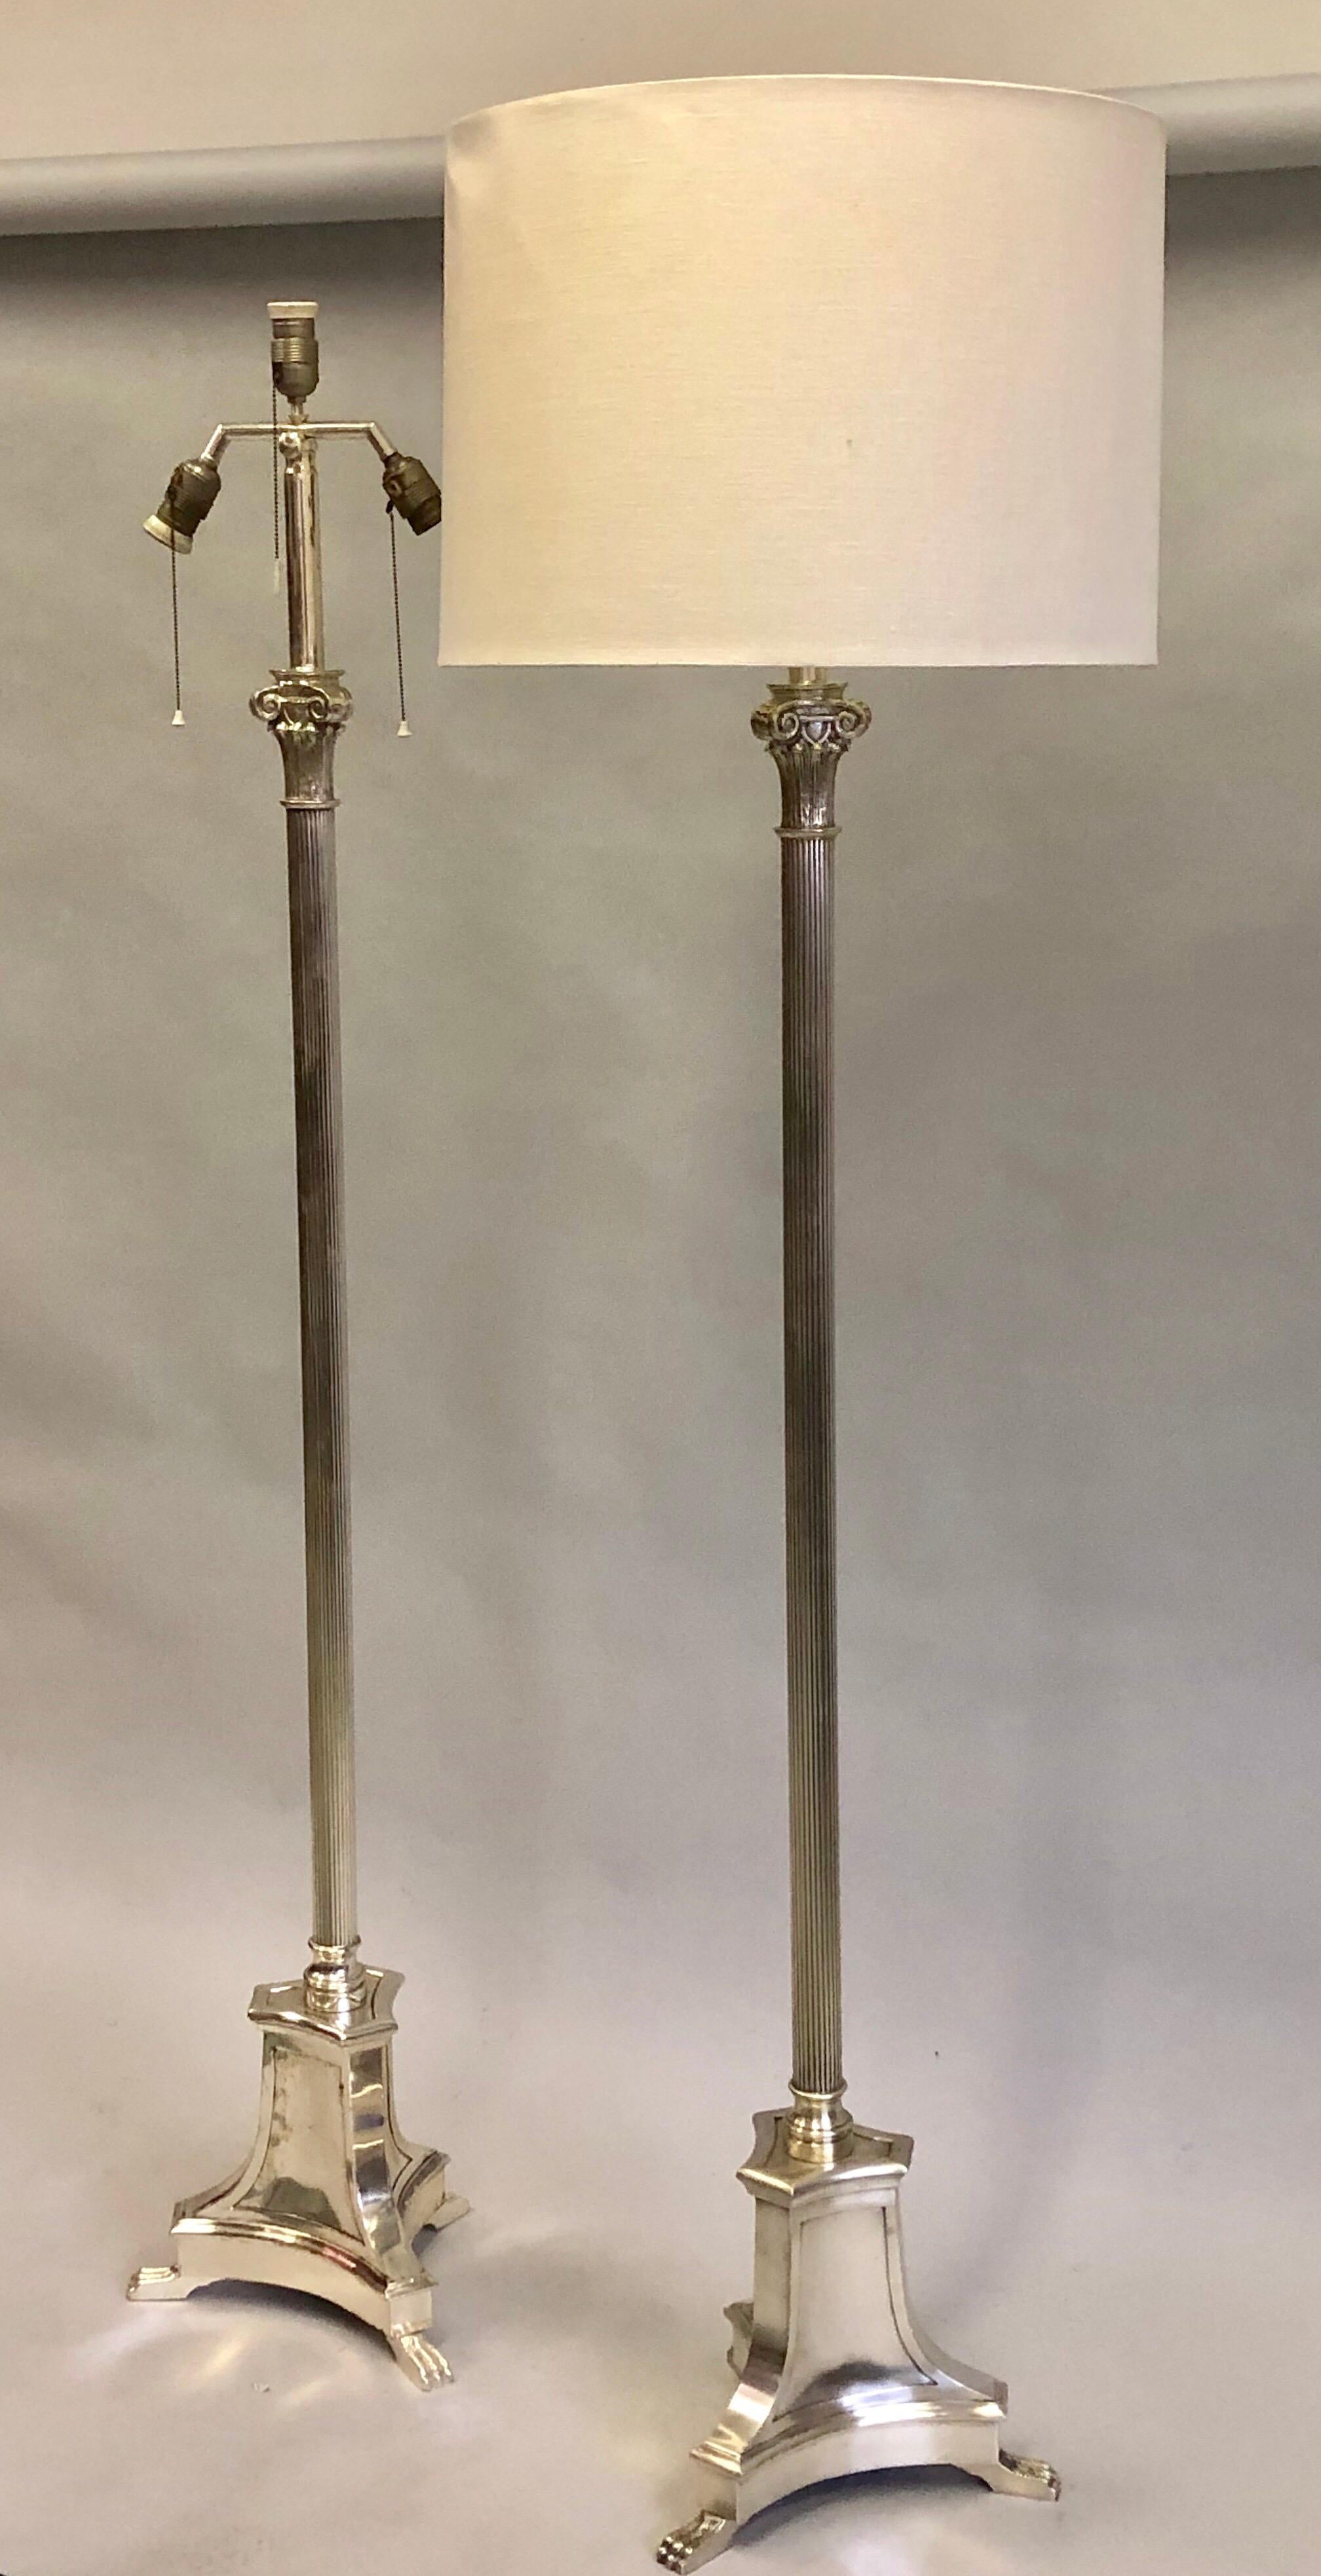 Rare pair of French Mid-Century Modern neoclassical silver floor lamps, attributed to Andre Arbus, circa 1930-1940. 

The iconic standard lamps are supported by a triangular base with 3 claw feet, each foot with 3 digits. The fluted stem rises to